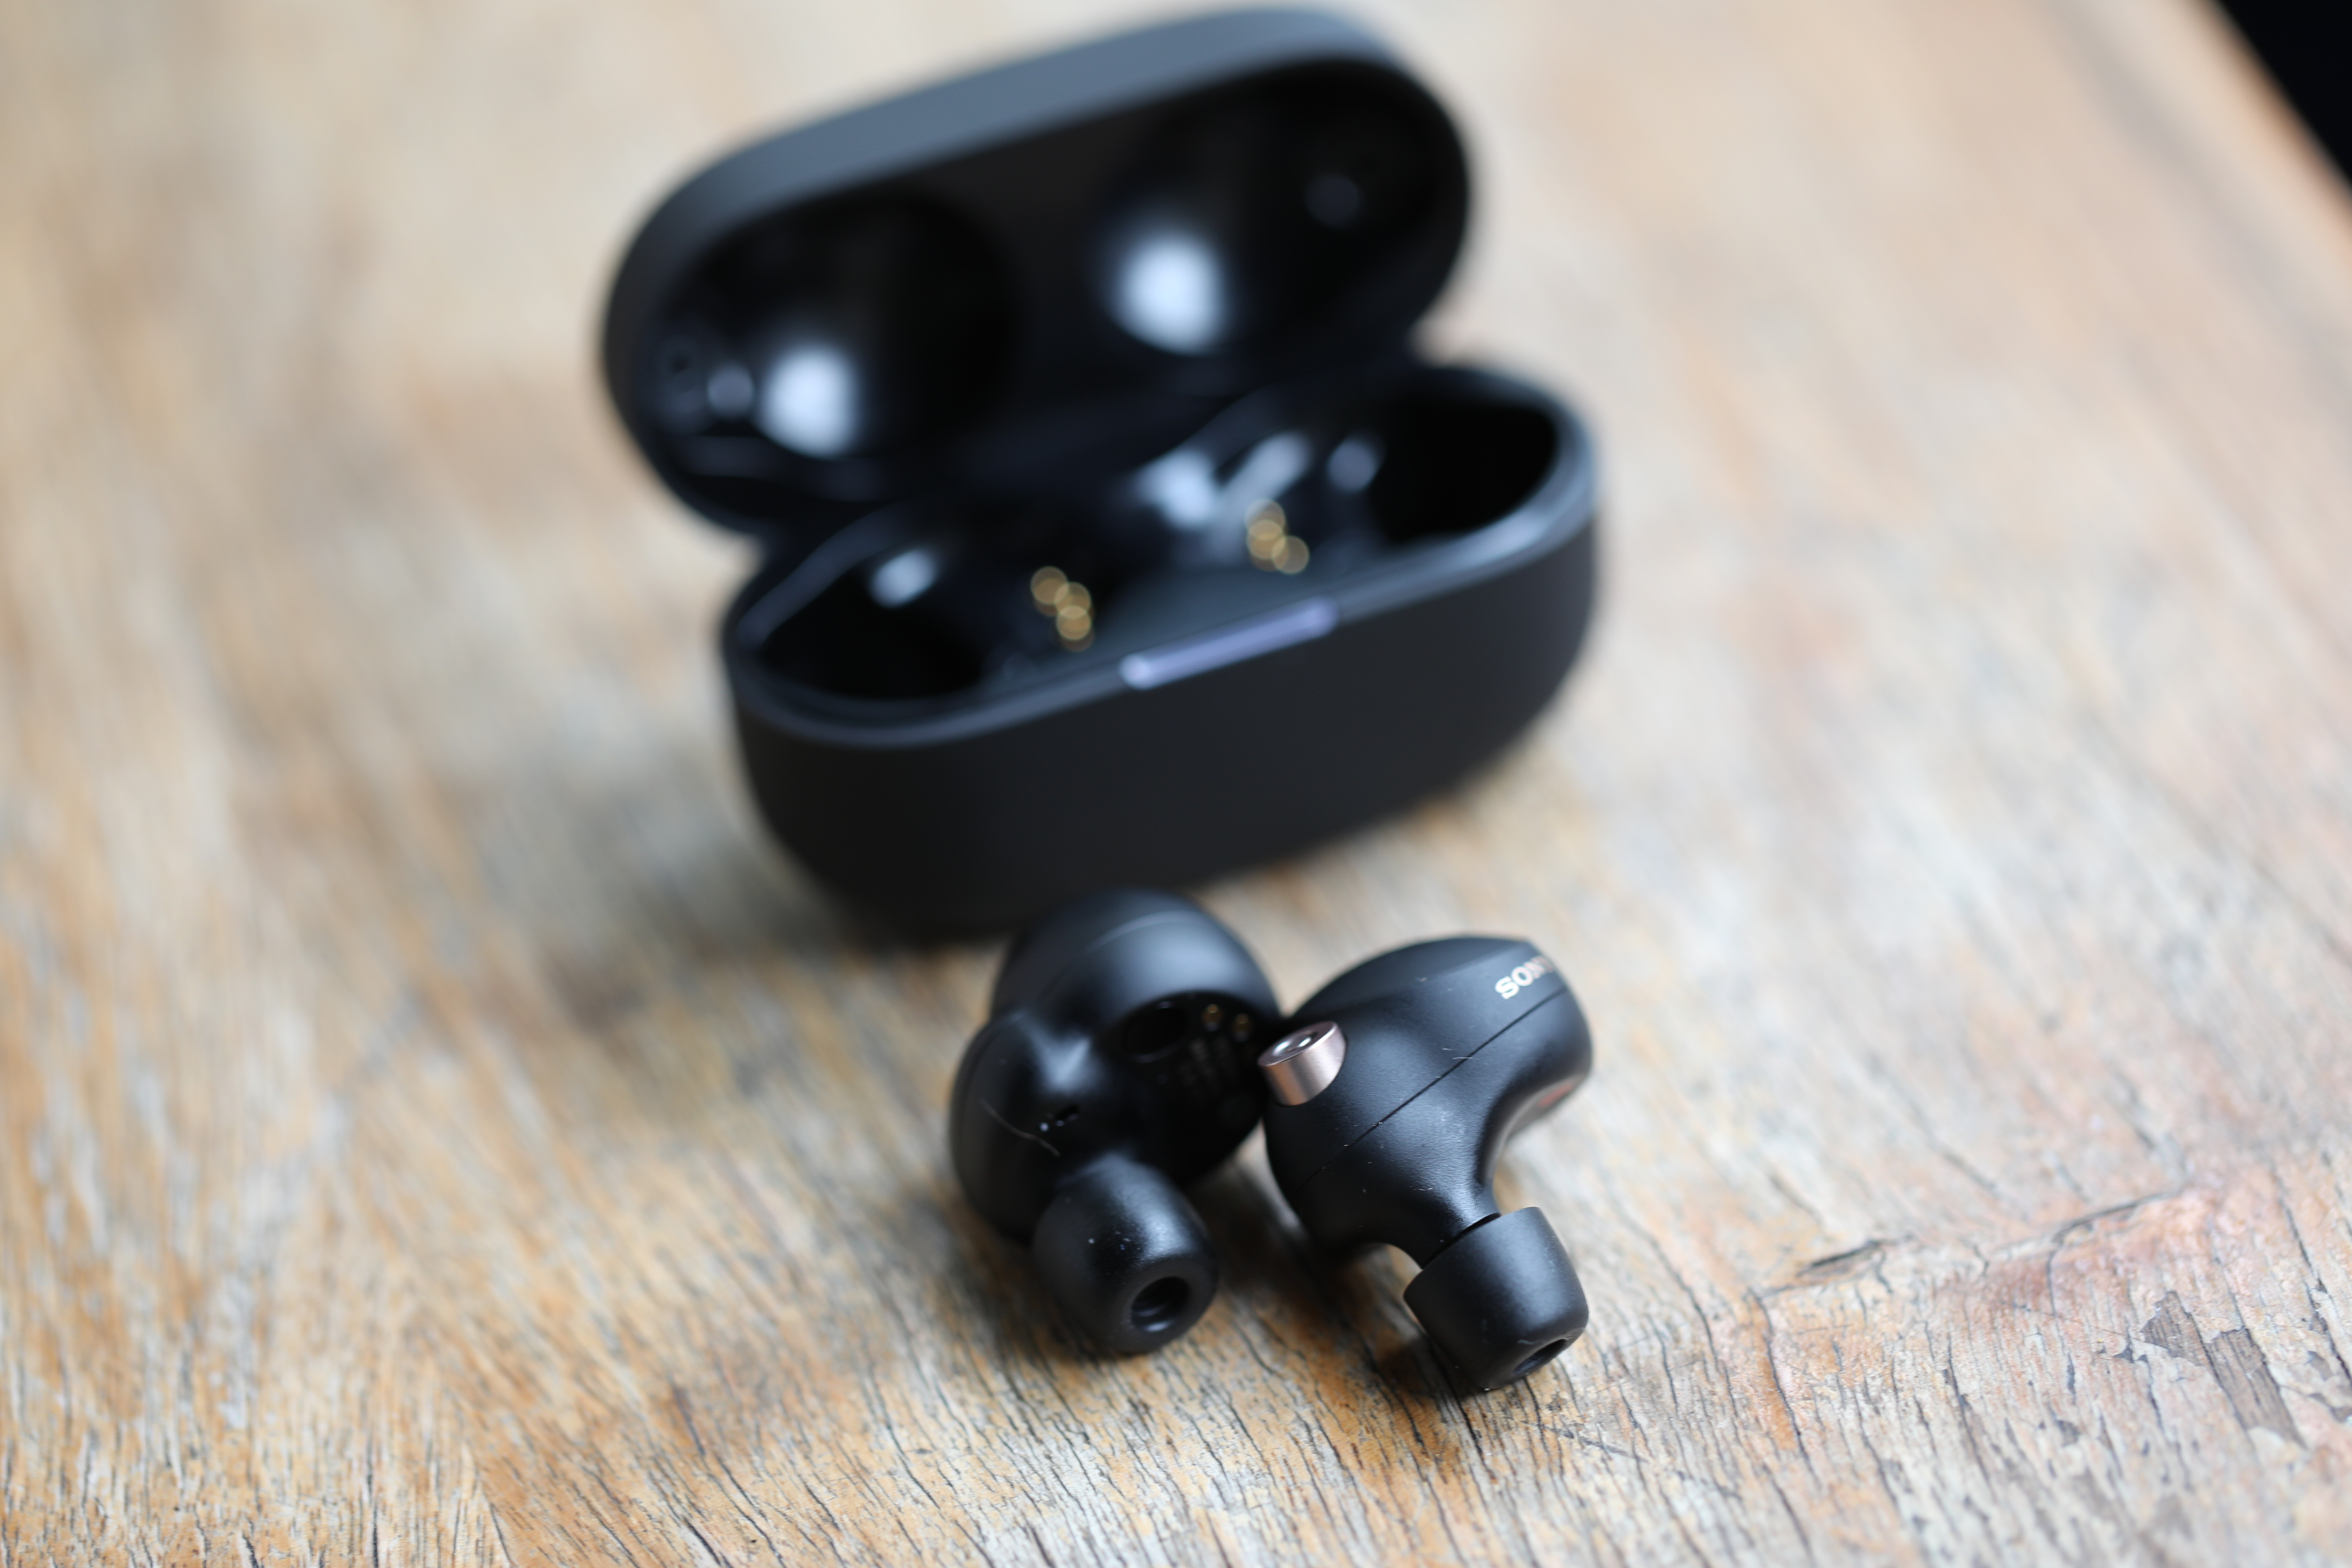 Sony sets a new standard with the WF-1000XM4 earbuds TechCrunch